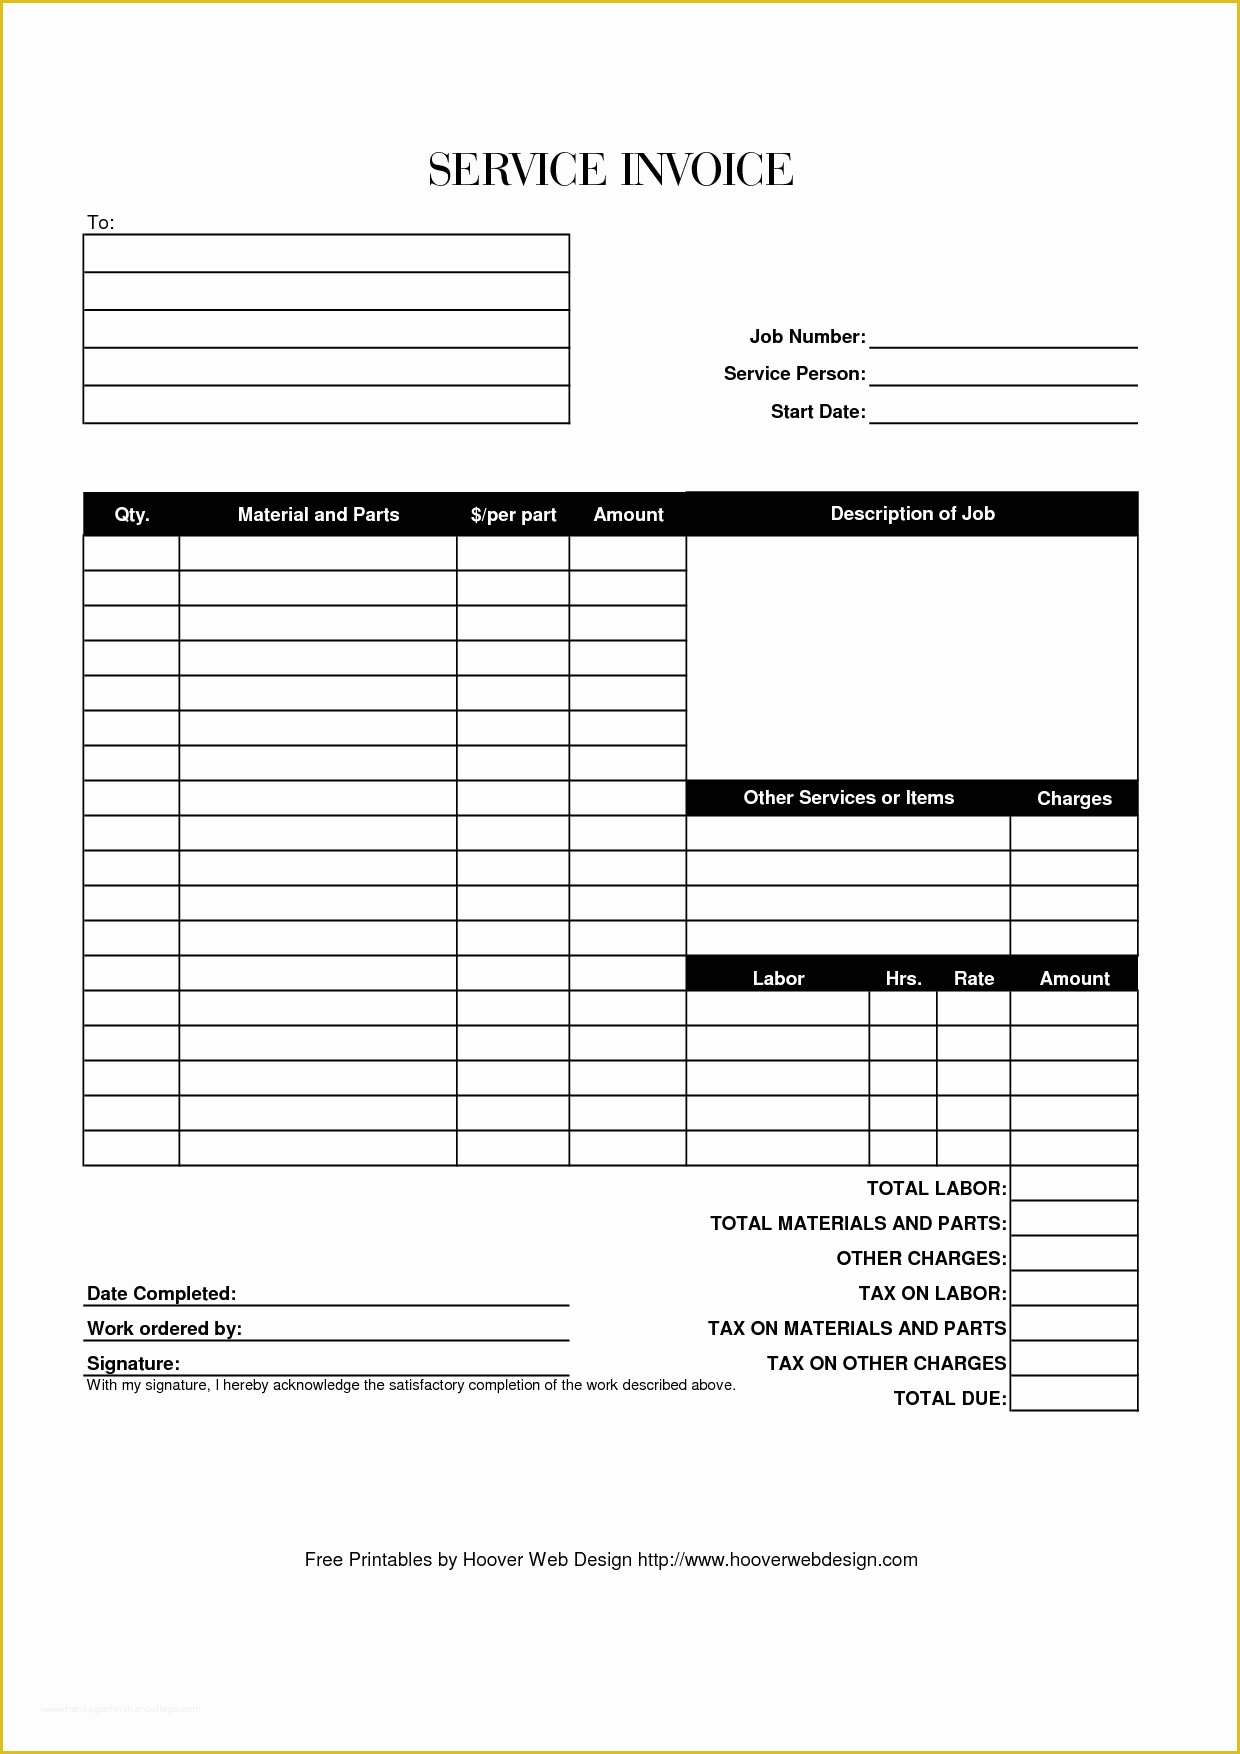 Free Simple Invoice Template Pdf Of Hoover Receipts